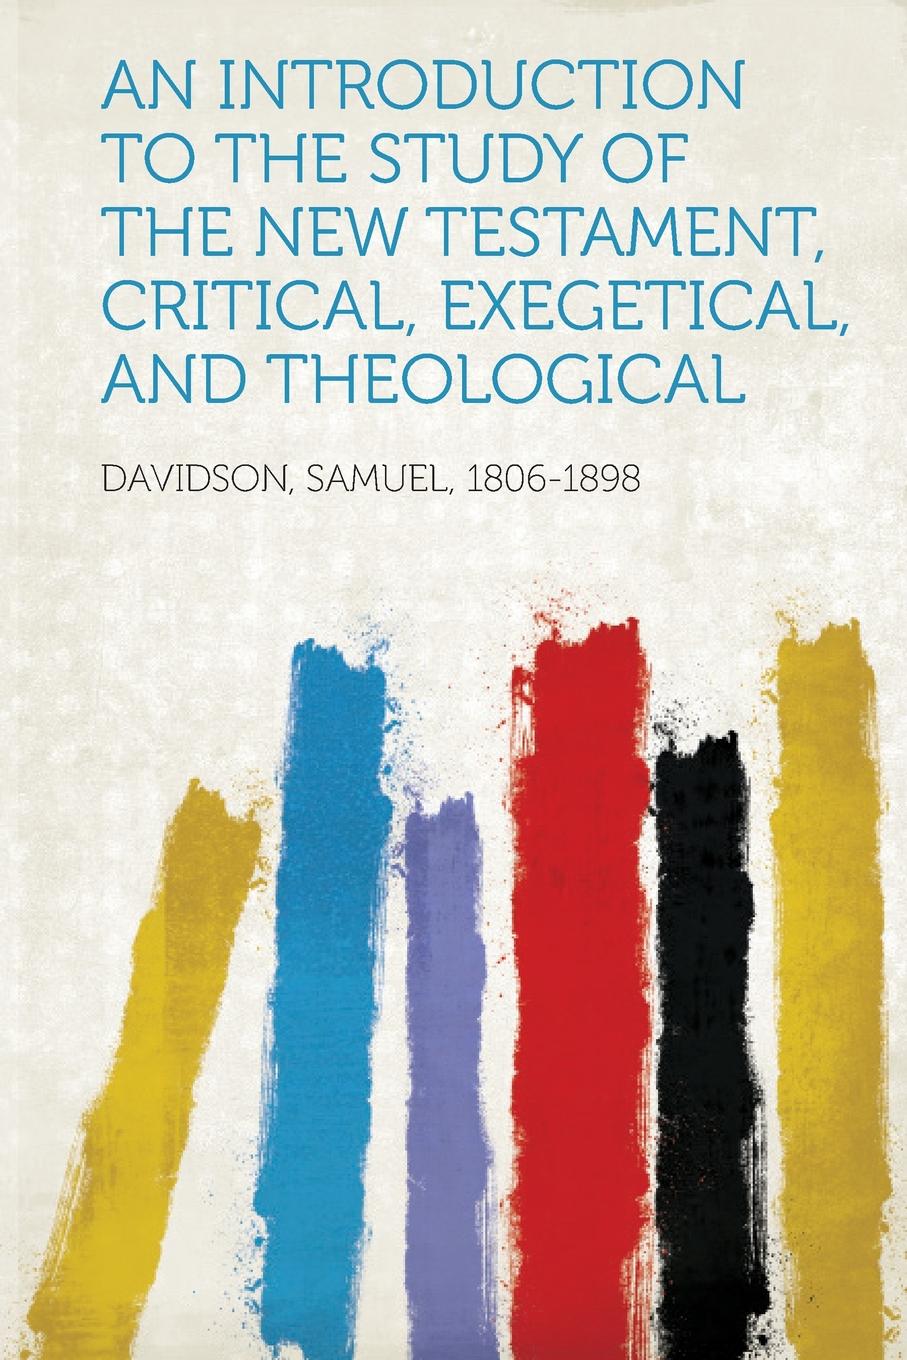 An Introduction to the Study of the New Testament, Critical, Exegetical, and Theological